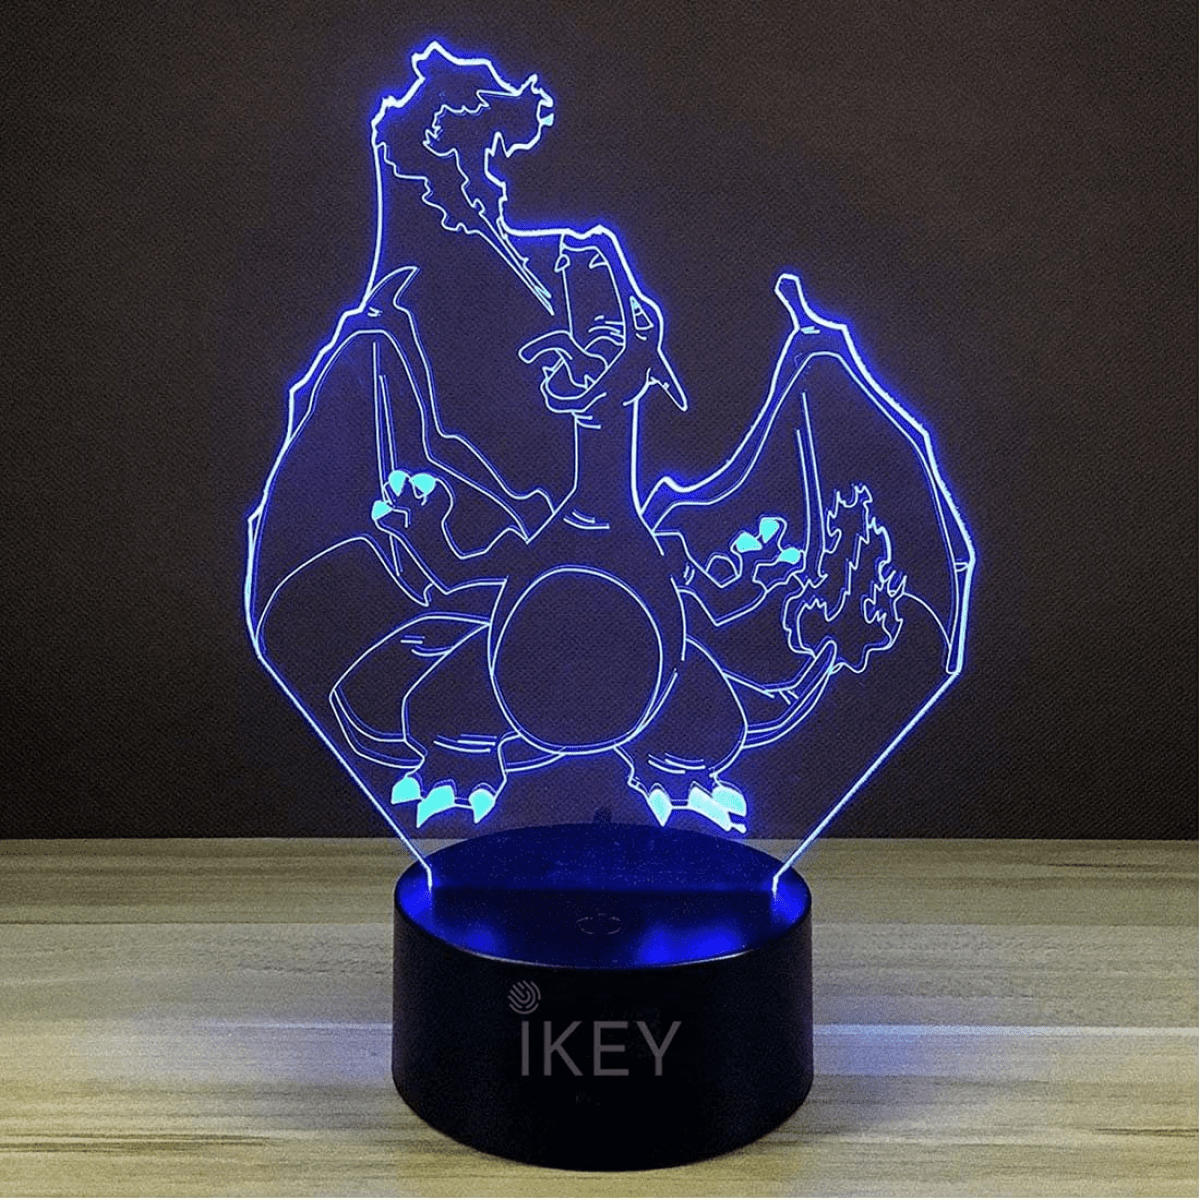 SAYTAY 3D Illusion Charizard LED Night Light,7 Colors Gradual Changing USB  Touch Switch 3D Visual Lights for Holiday Gifts or Home Decorations -  Walmart.com